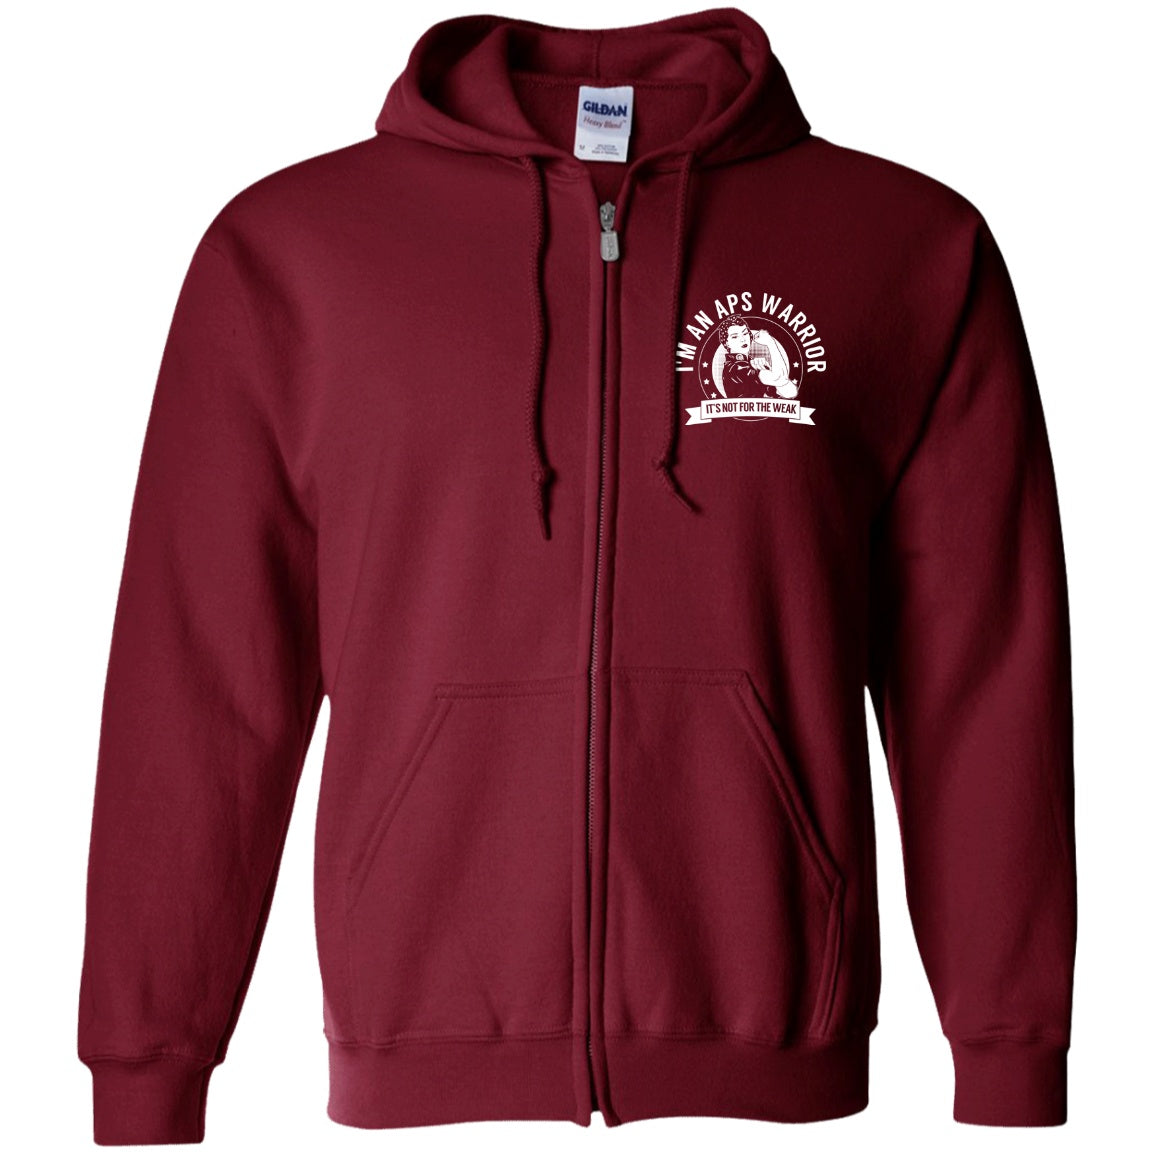 Antiphospholipid Antibody Syndrome - APS Warrior NFTW Zip Up Hooded Sweatshirt - The Unchargeables